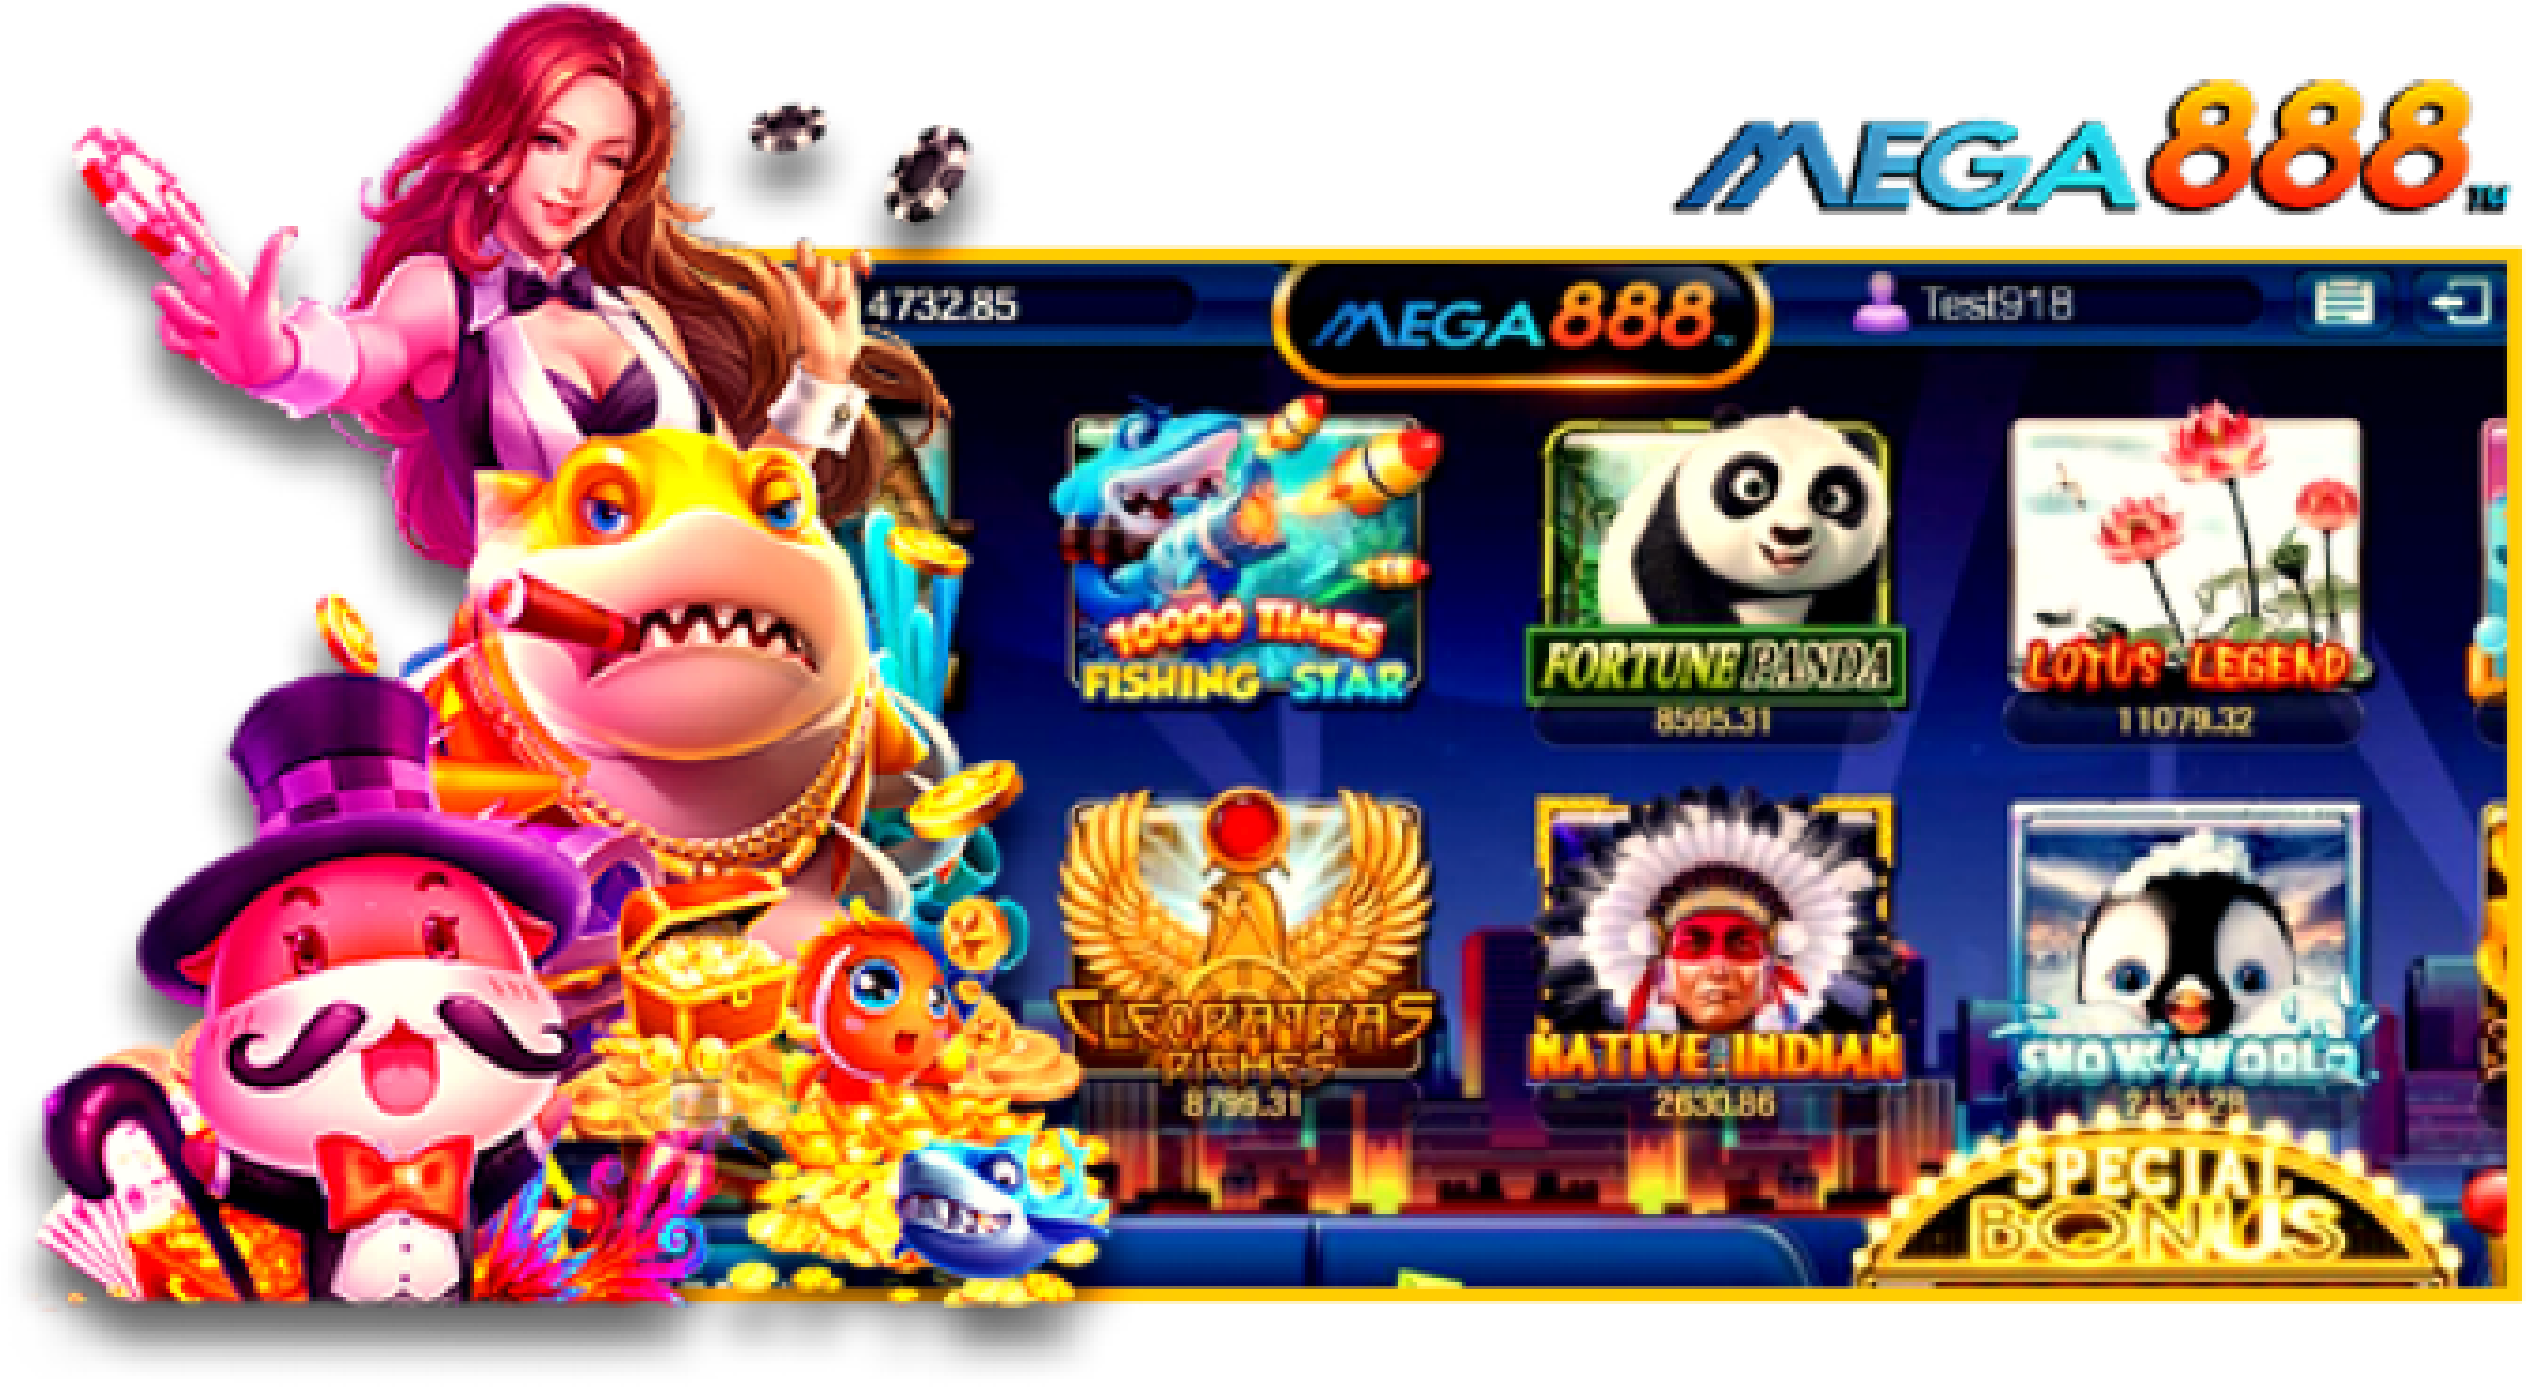 mega888 variety slot game available to play